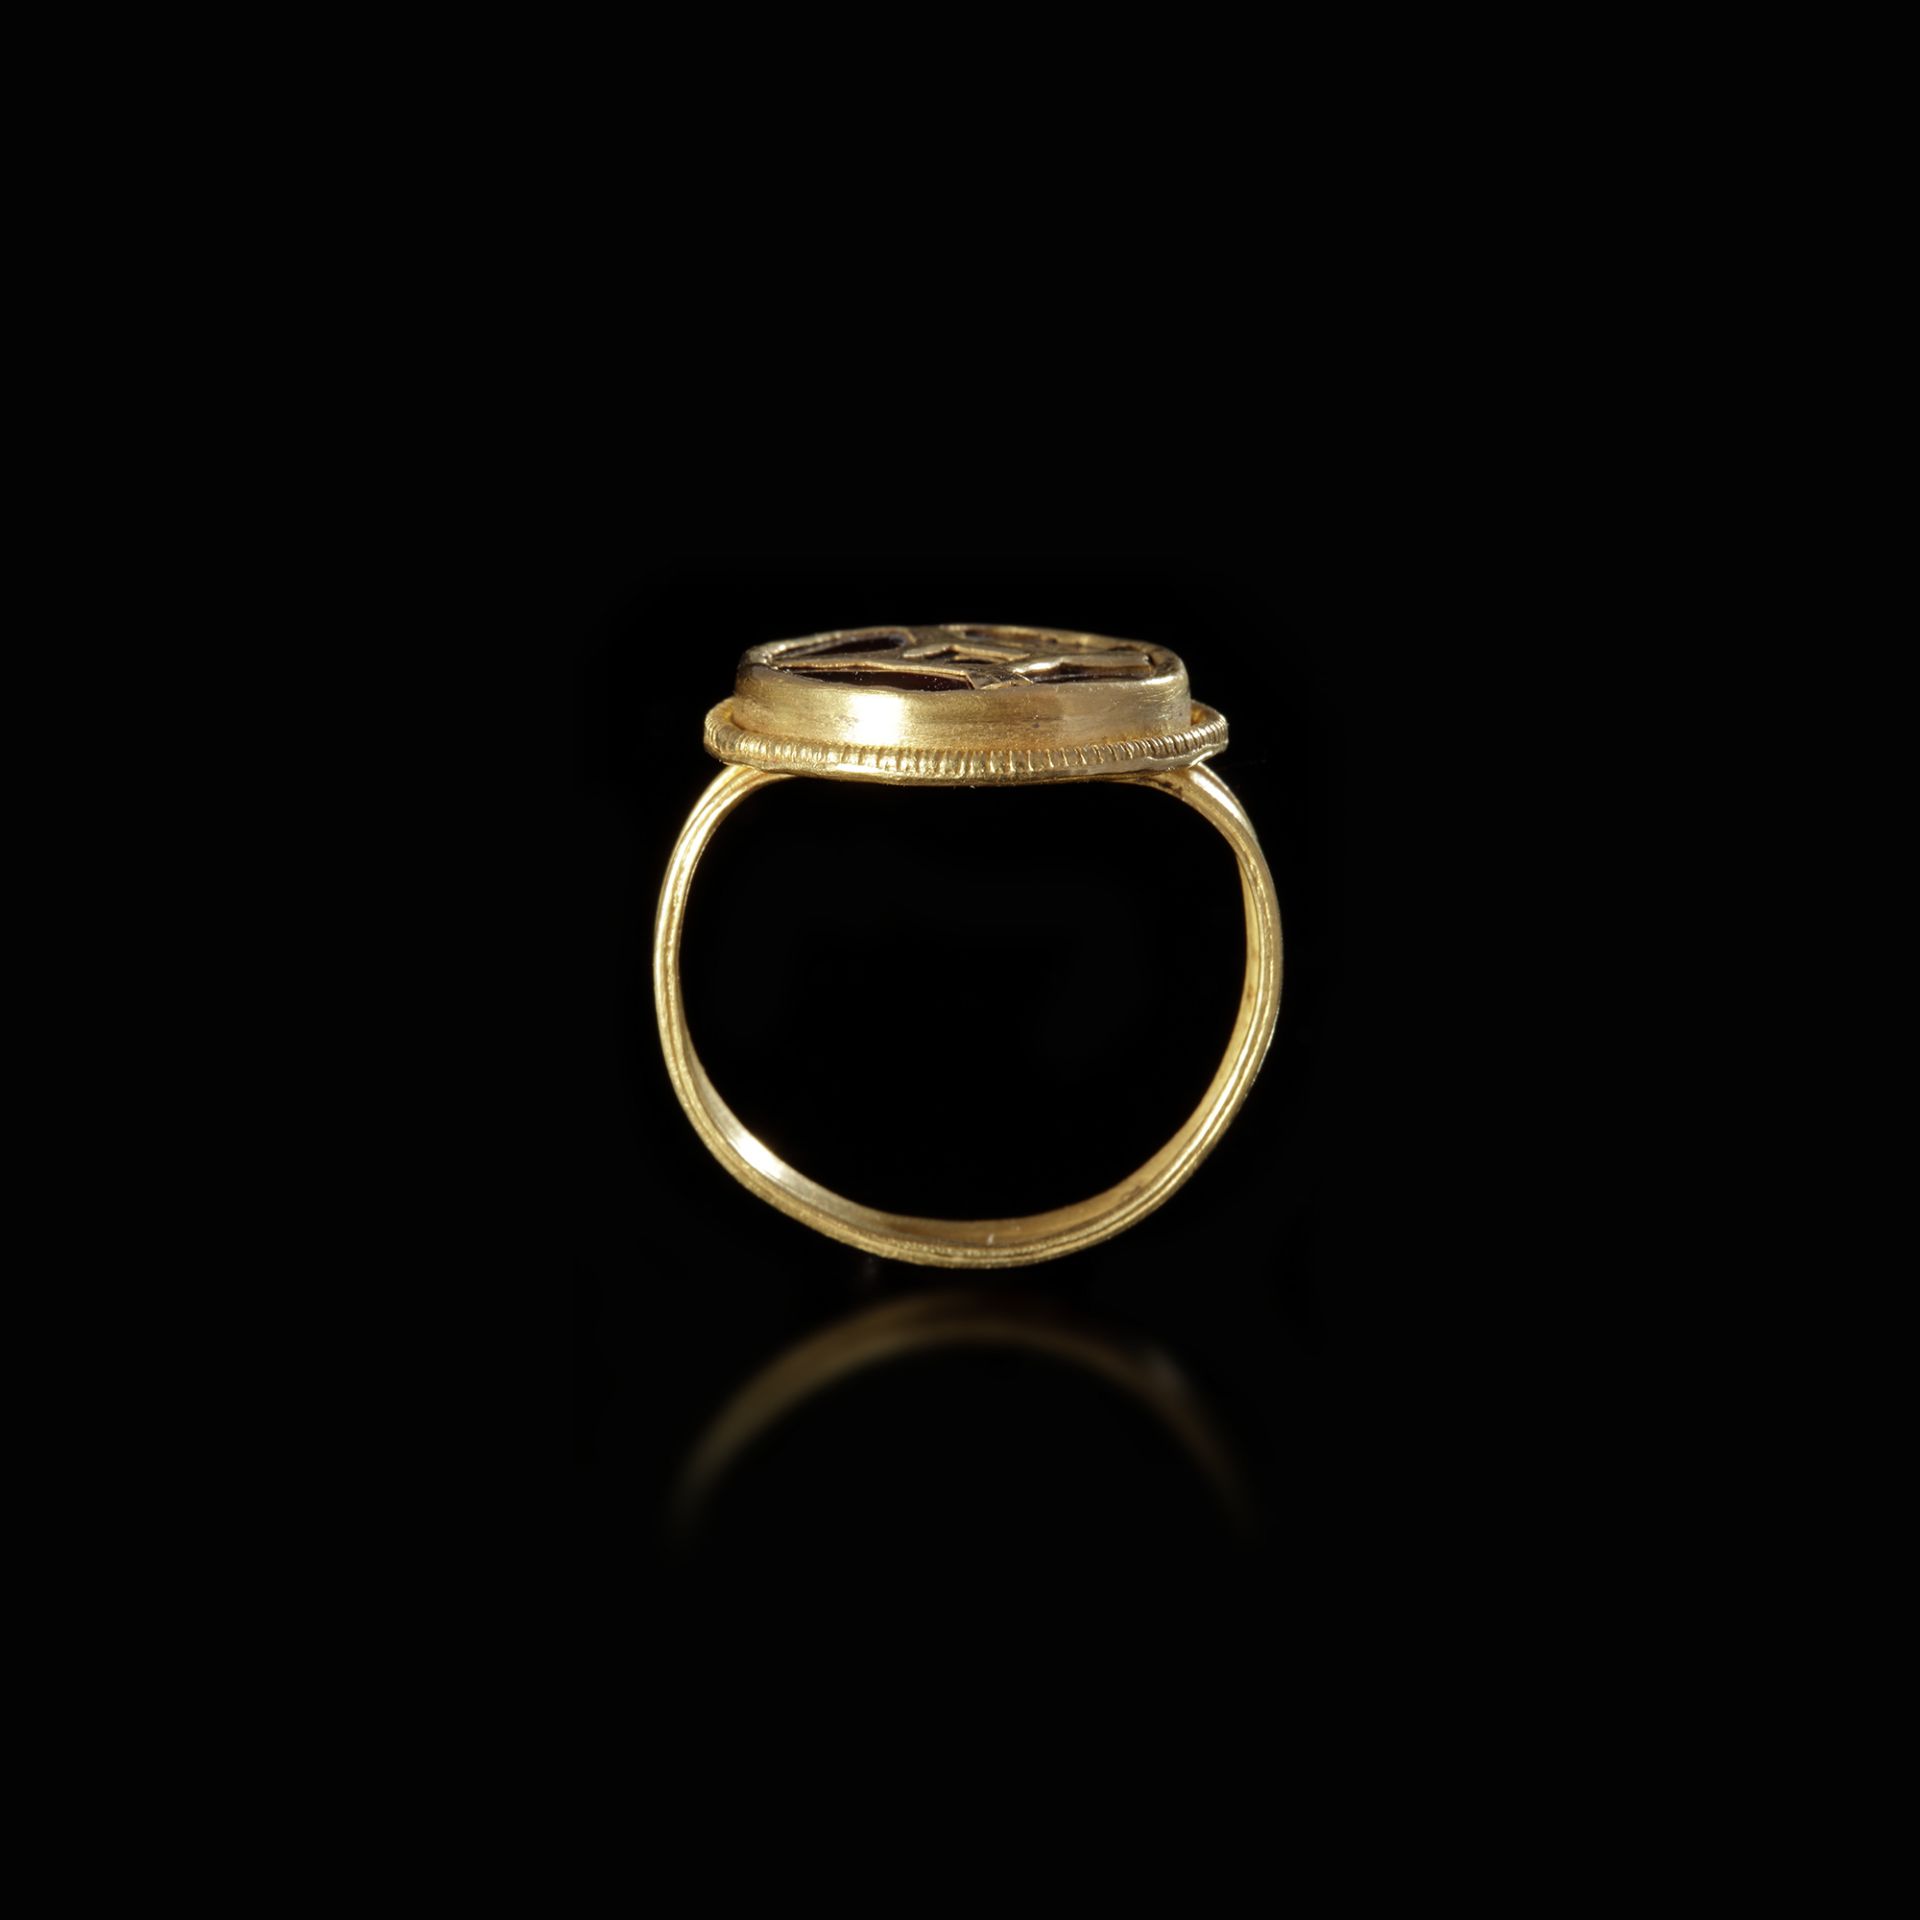 A GOLD GOTHIC RING WITH A GARNET INLAID BEZEL, 5TH CENTURY AD - Image 2 of 3